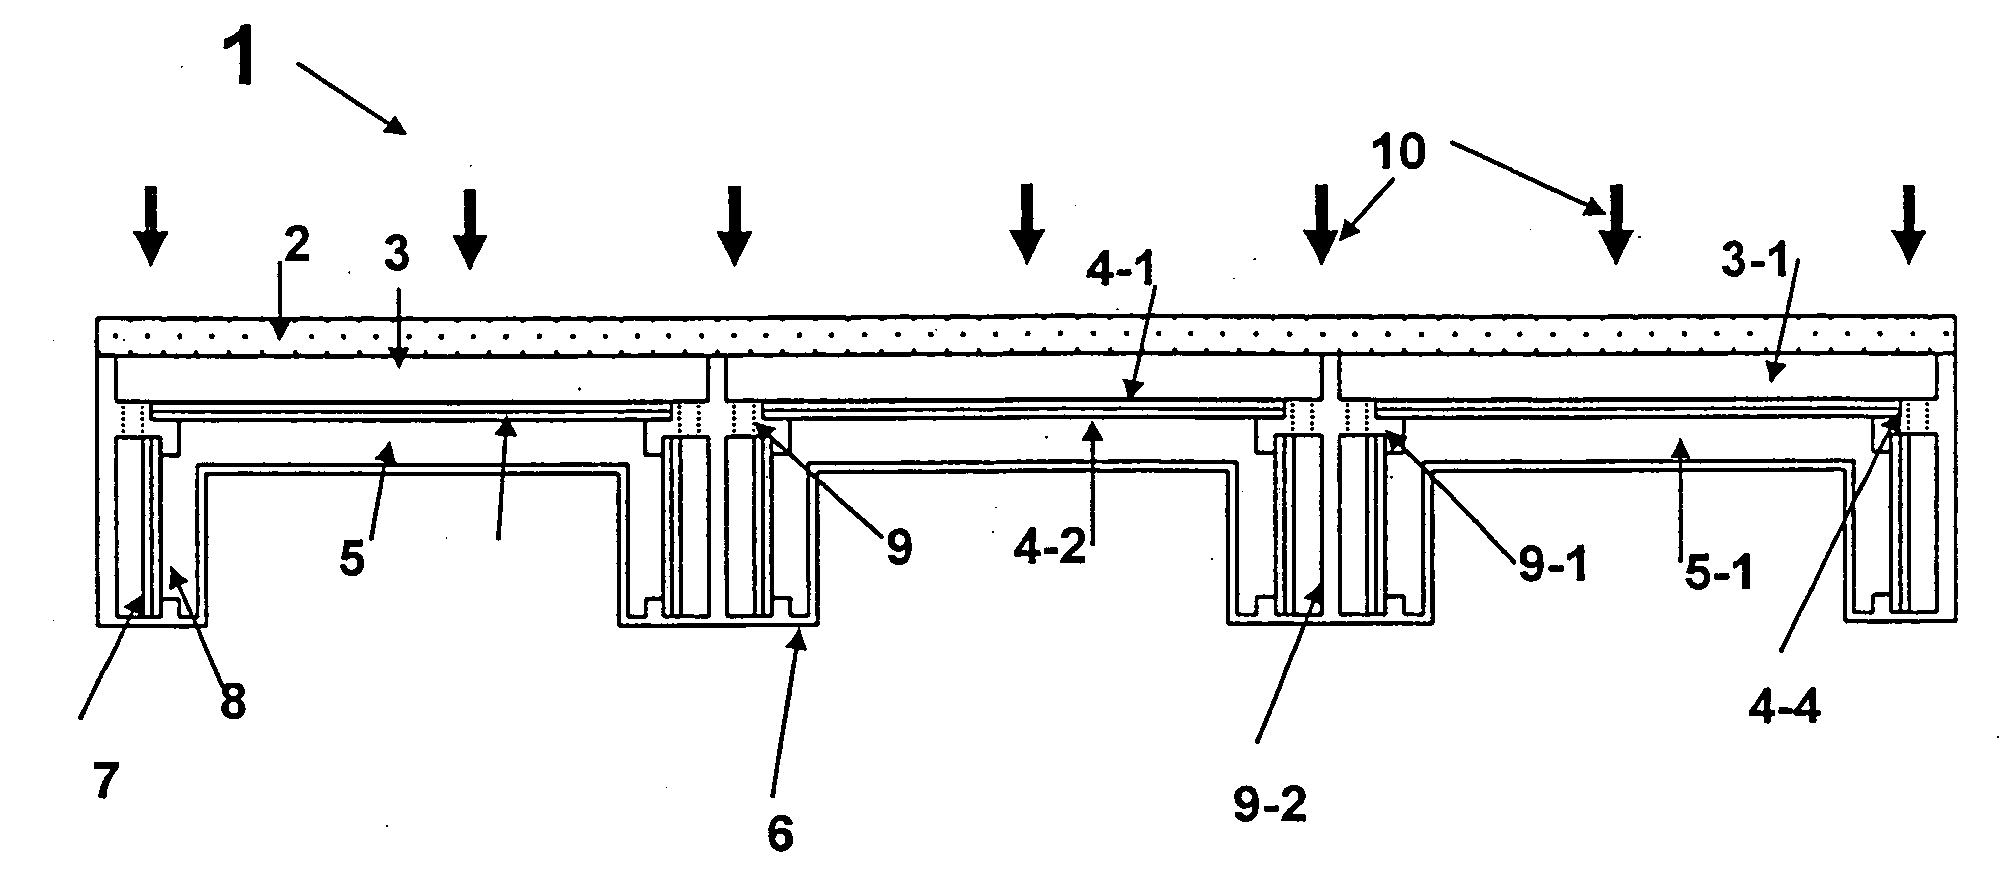 Integrated photoelectrochemical cell and system having a liquid electrolyte